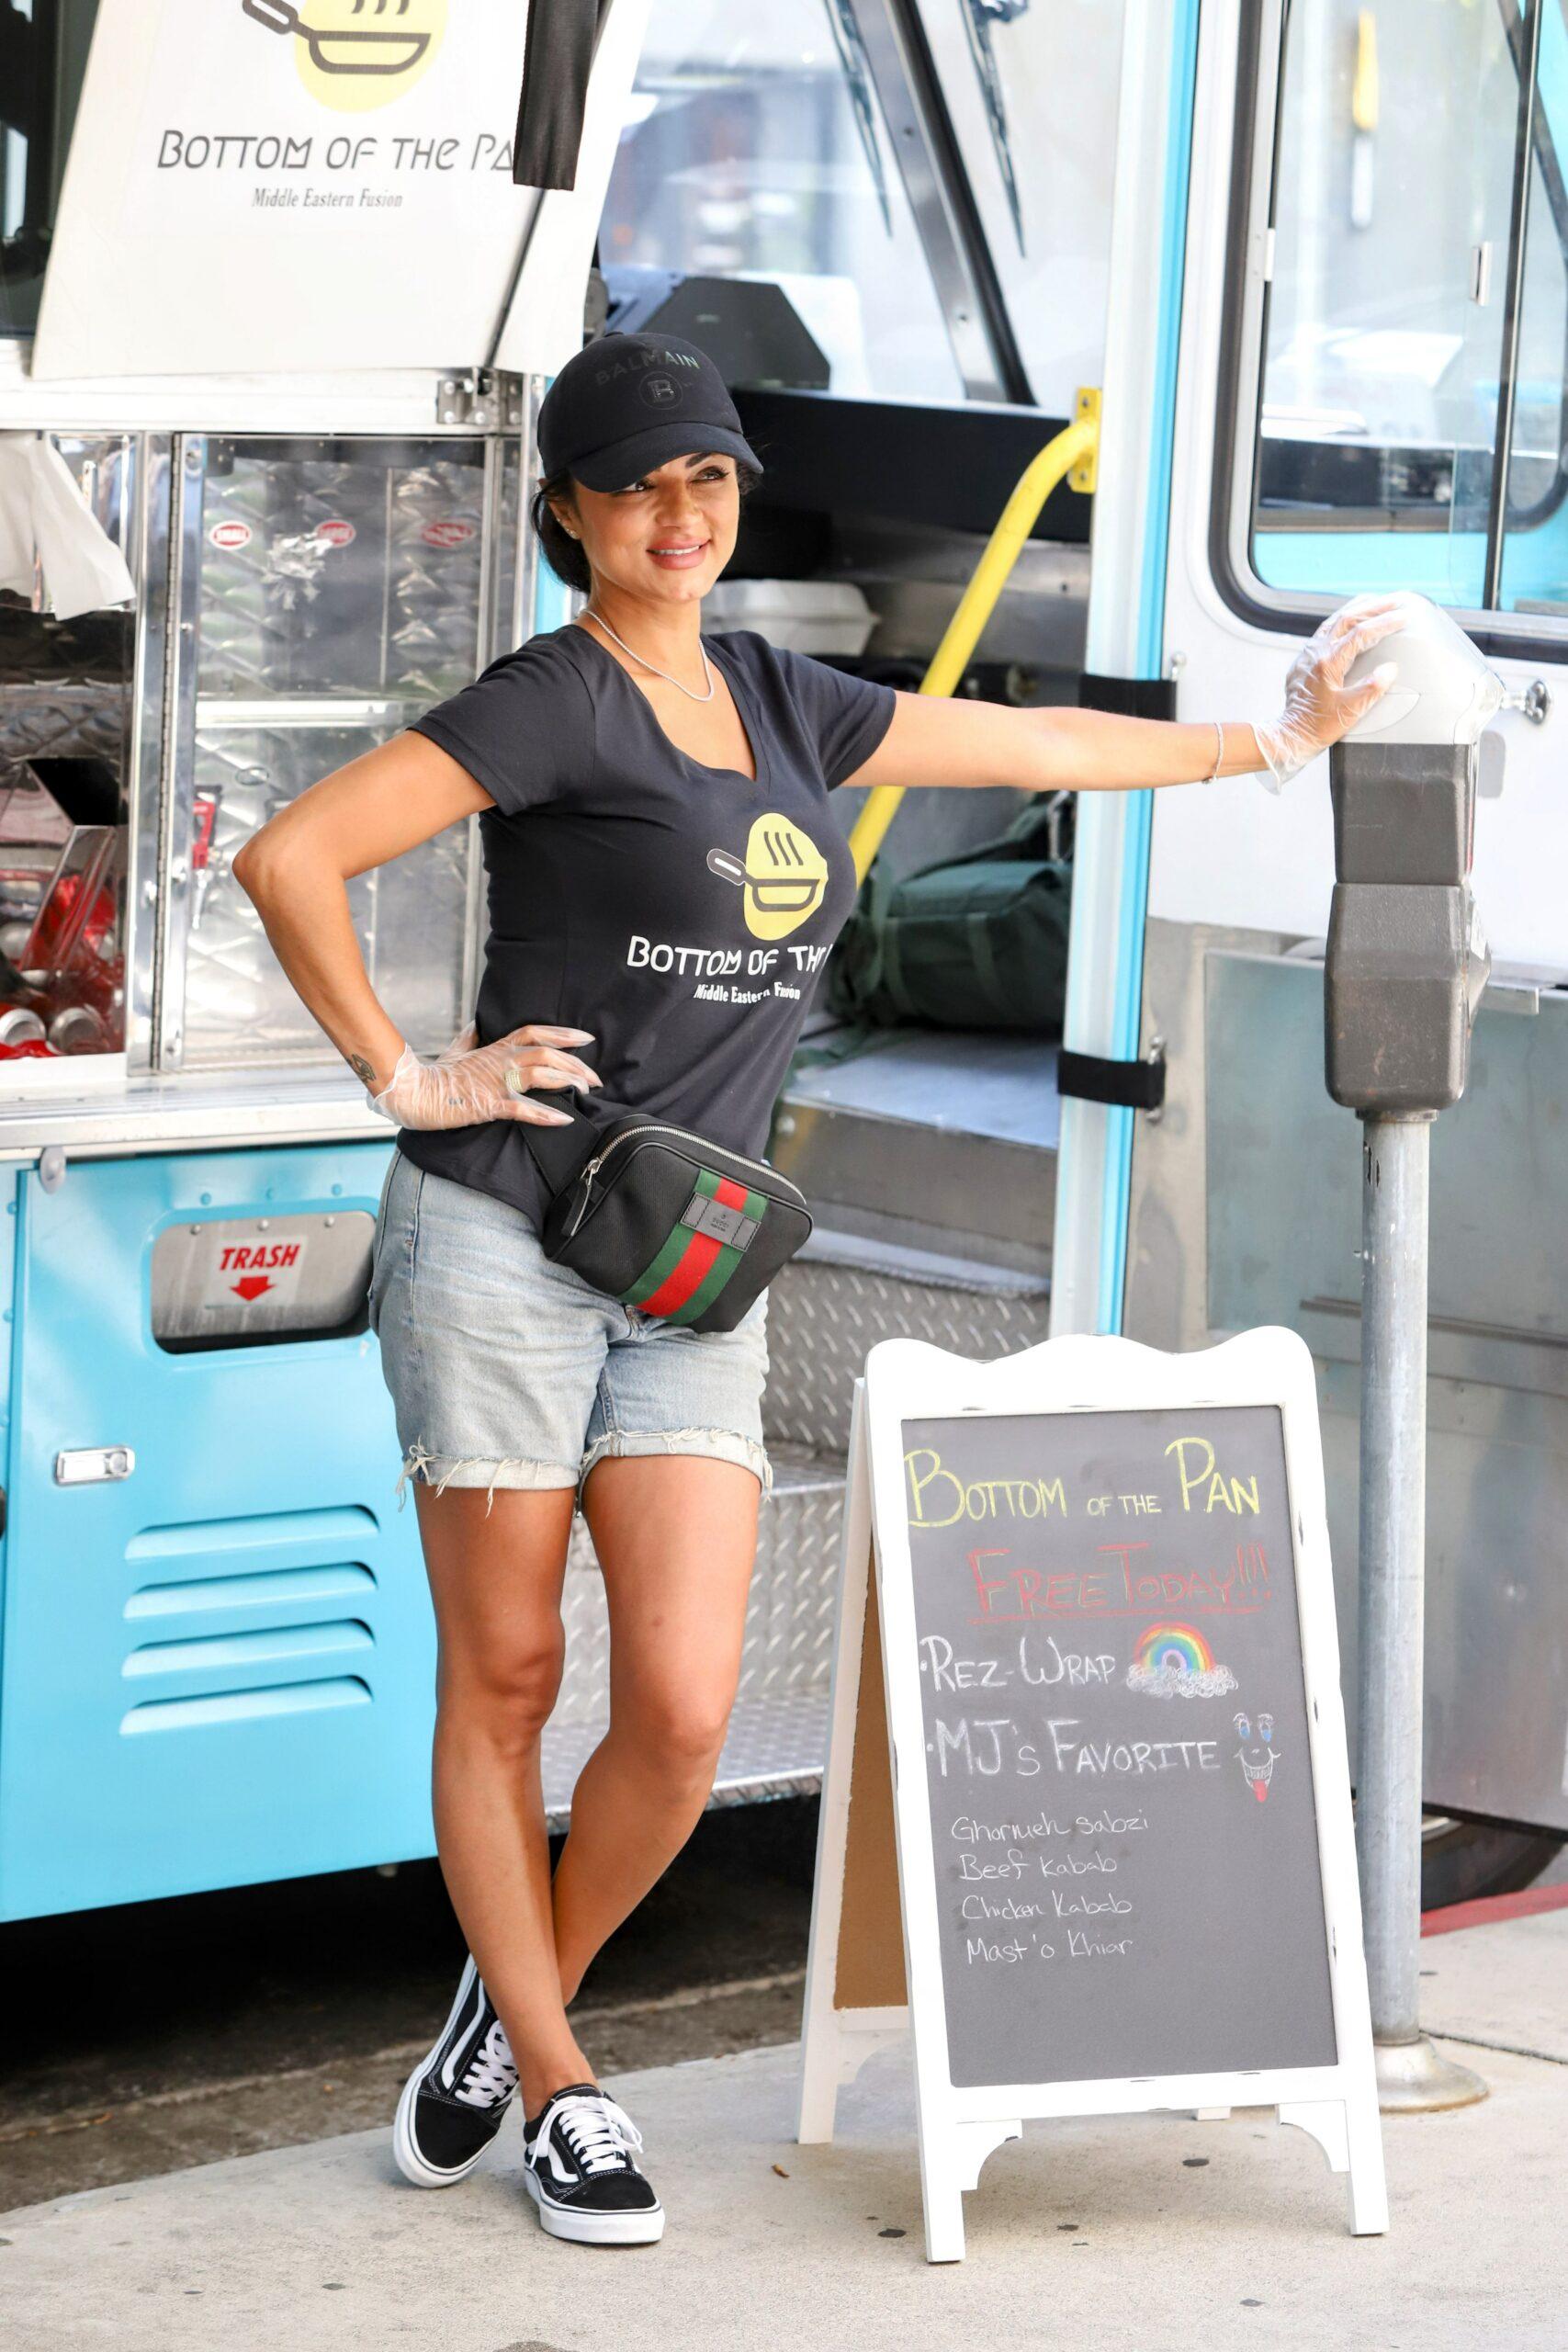 Shahs of Sunset set up a food truck called quot Bottom of the Pan quot with Middle Eastern food for show